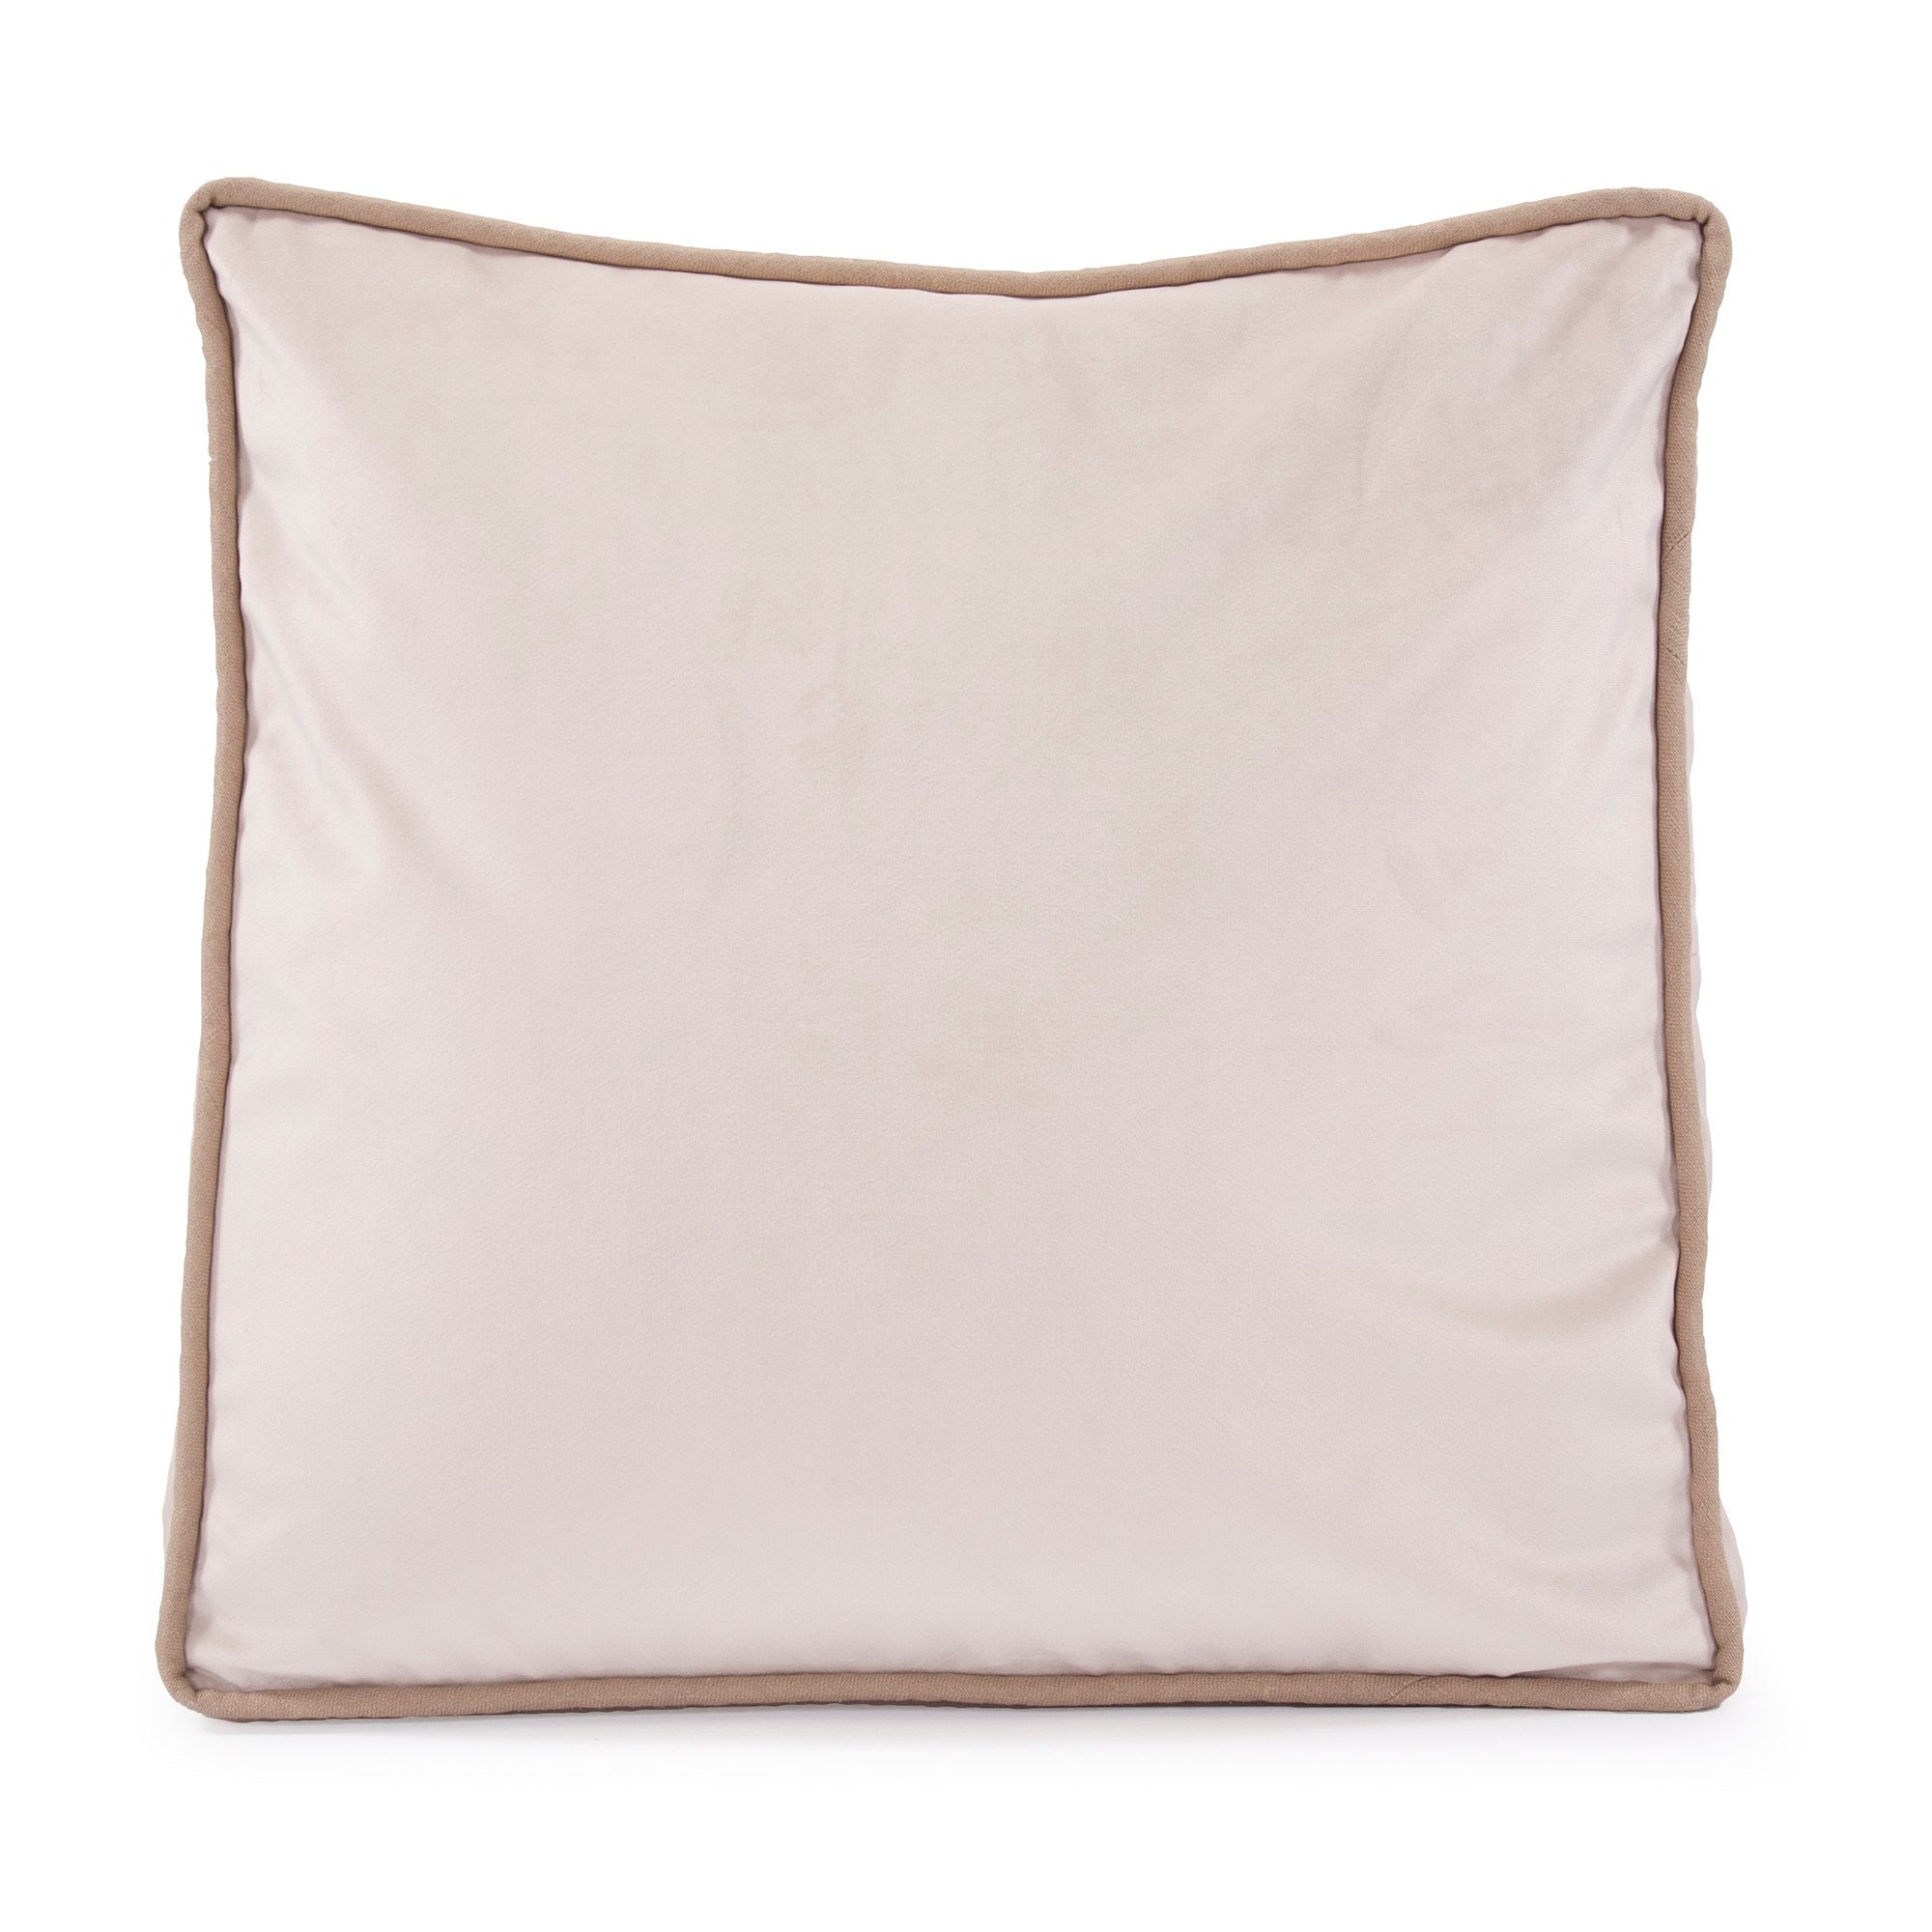 Gusseted Bella Sand Down Pillow- 20" x 20"